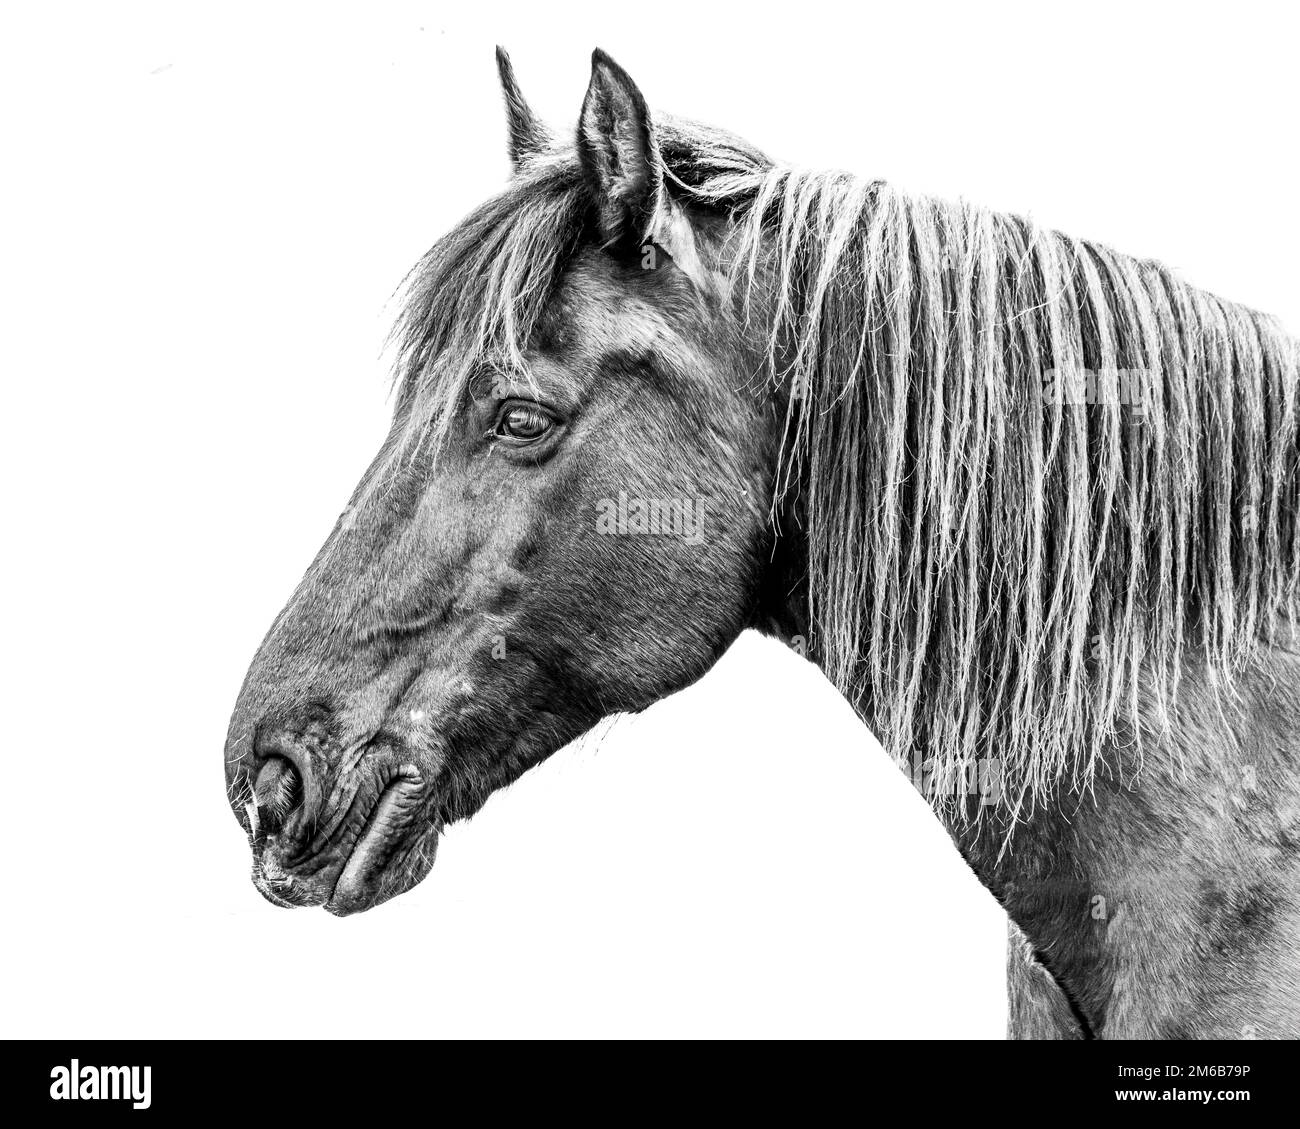 A side photograph of a horse head and neck in black & white with great detail and sharpness.  The equine portrait is isolated on white. Stock Photo